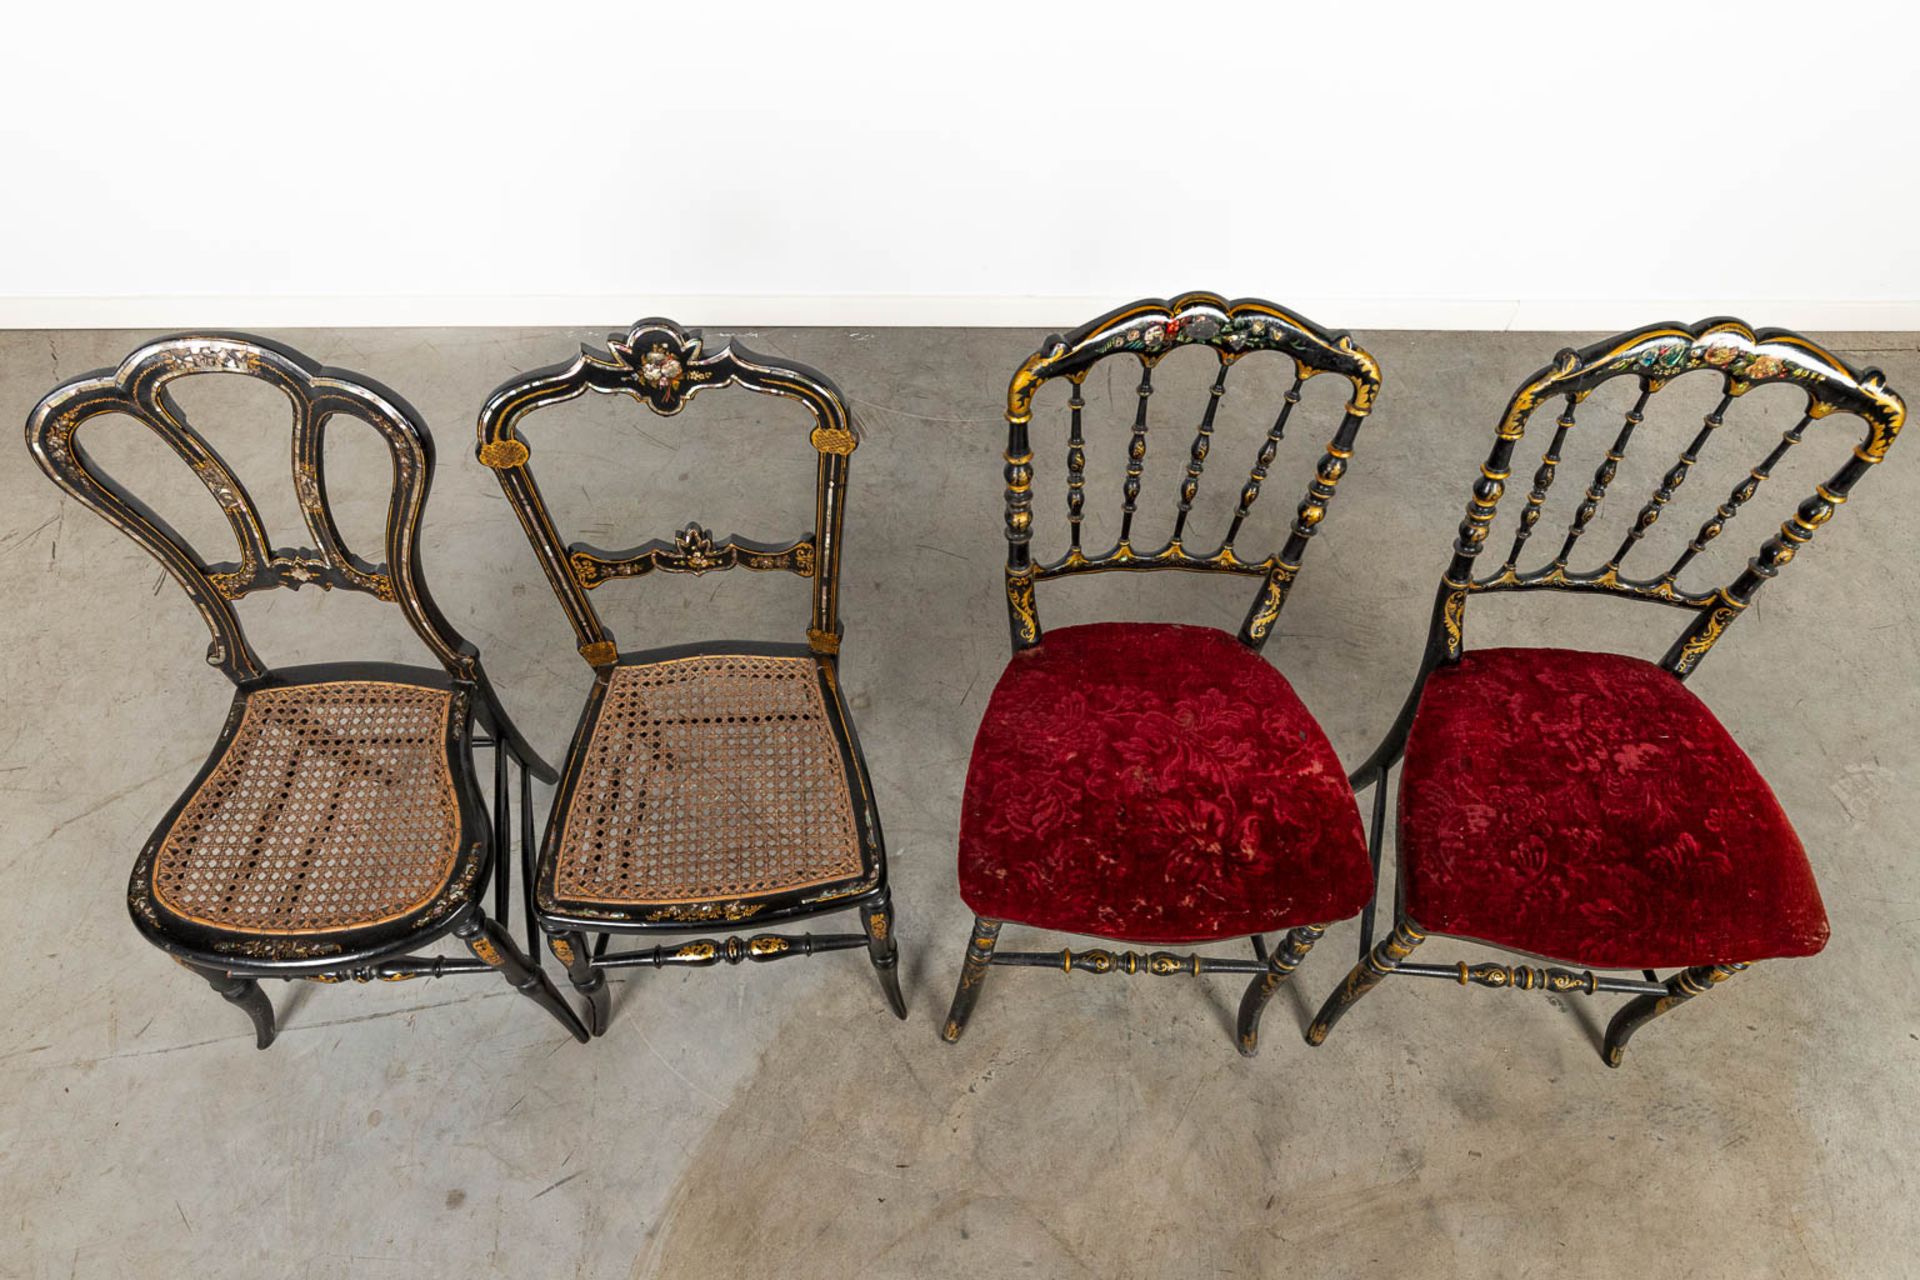 A collection of 3 chairs inlaid with mother of pearl and hand-painted decors. - Image 10 of 10